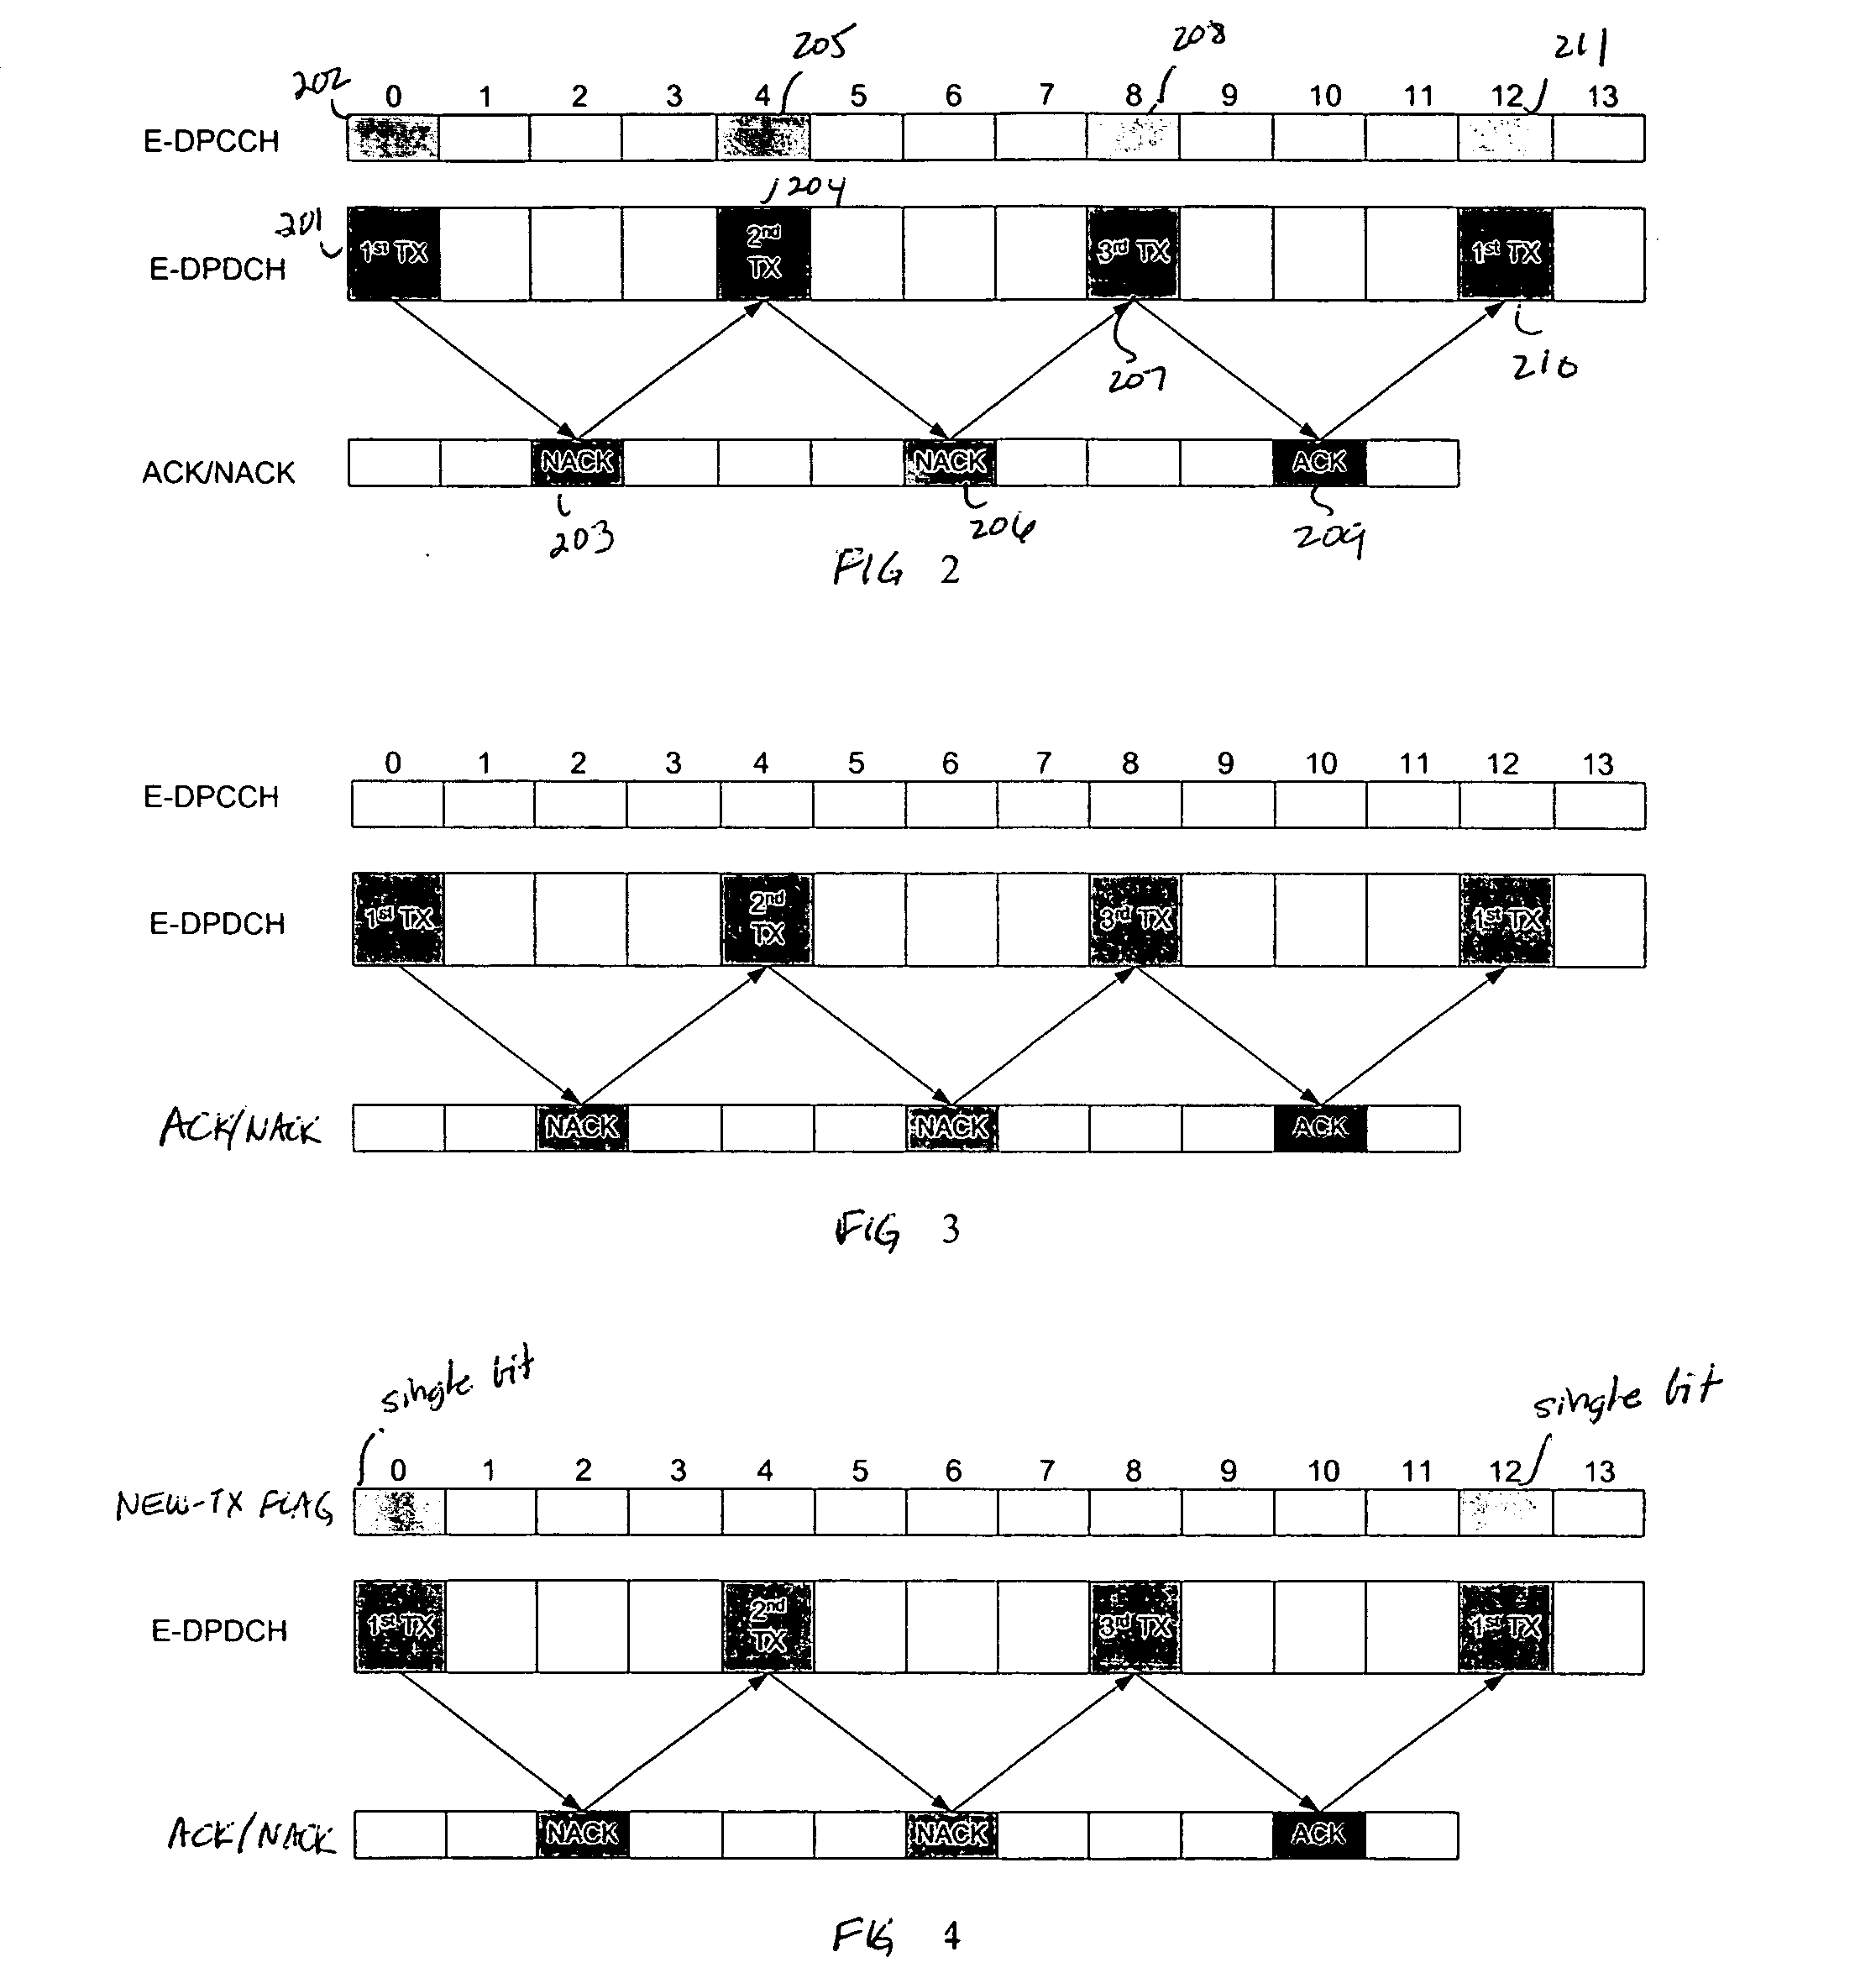 Method of increasing the capacity of enhanced data channel on uplink in a wireless communications systems